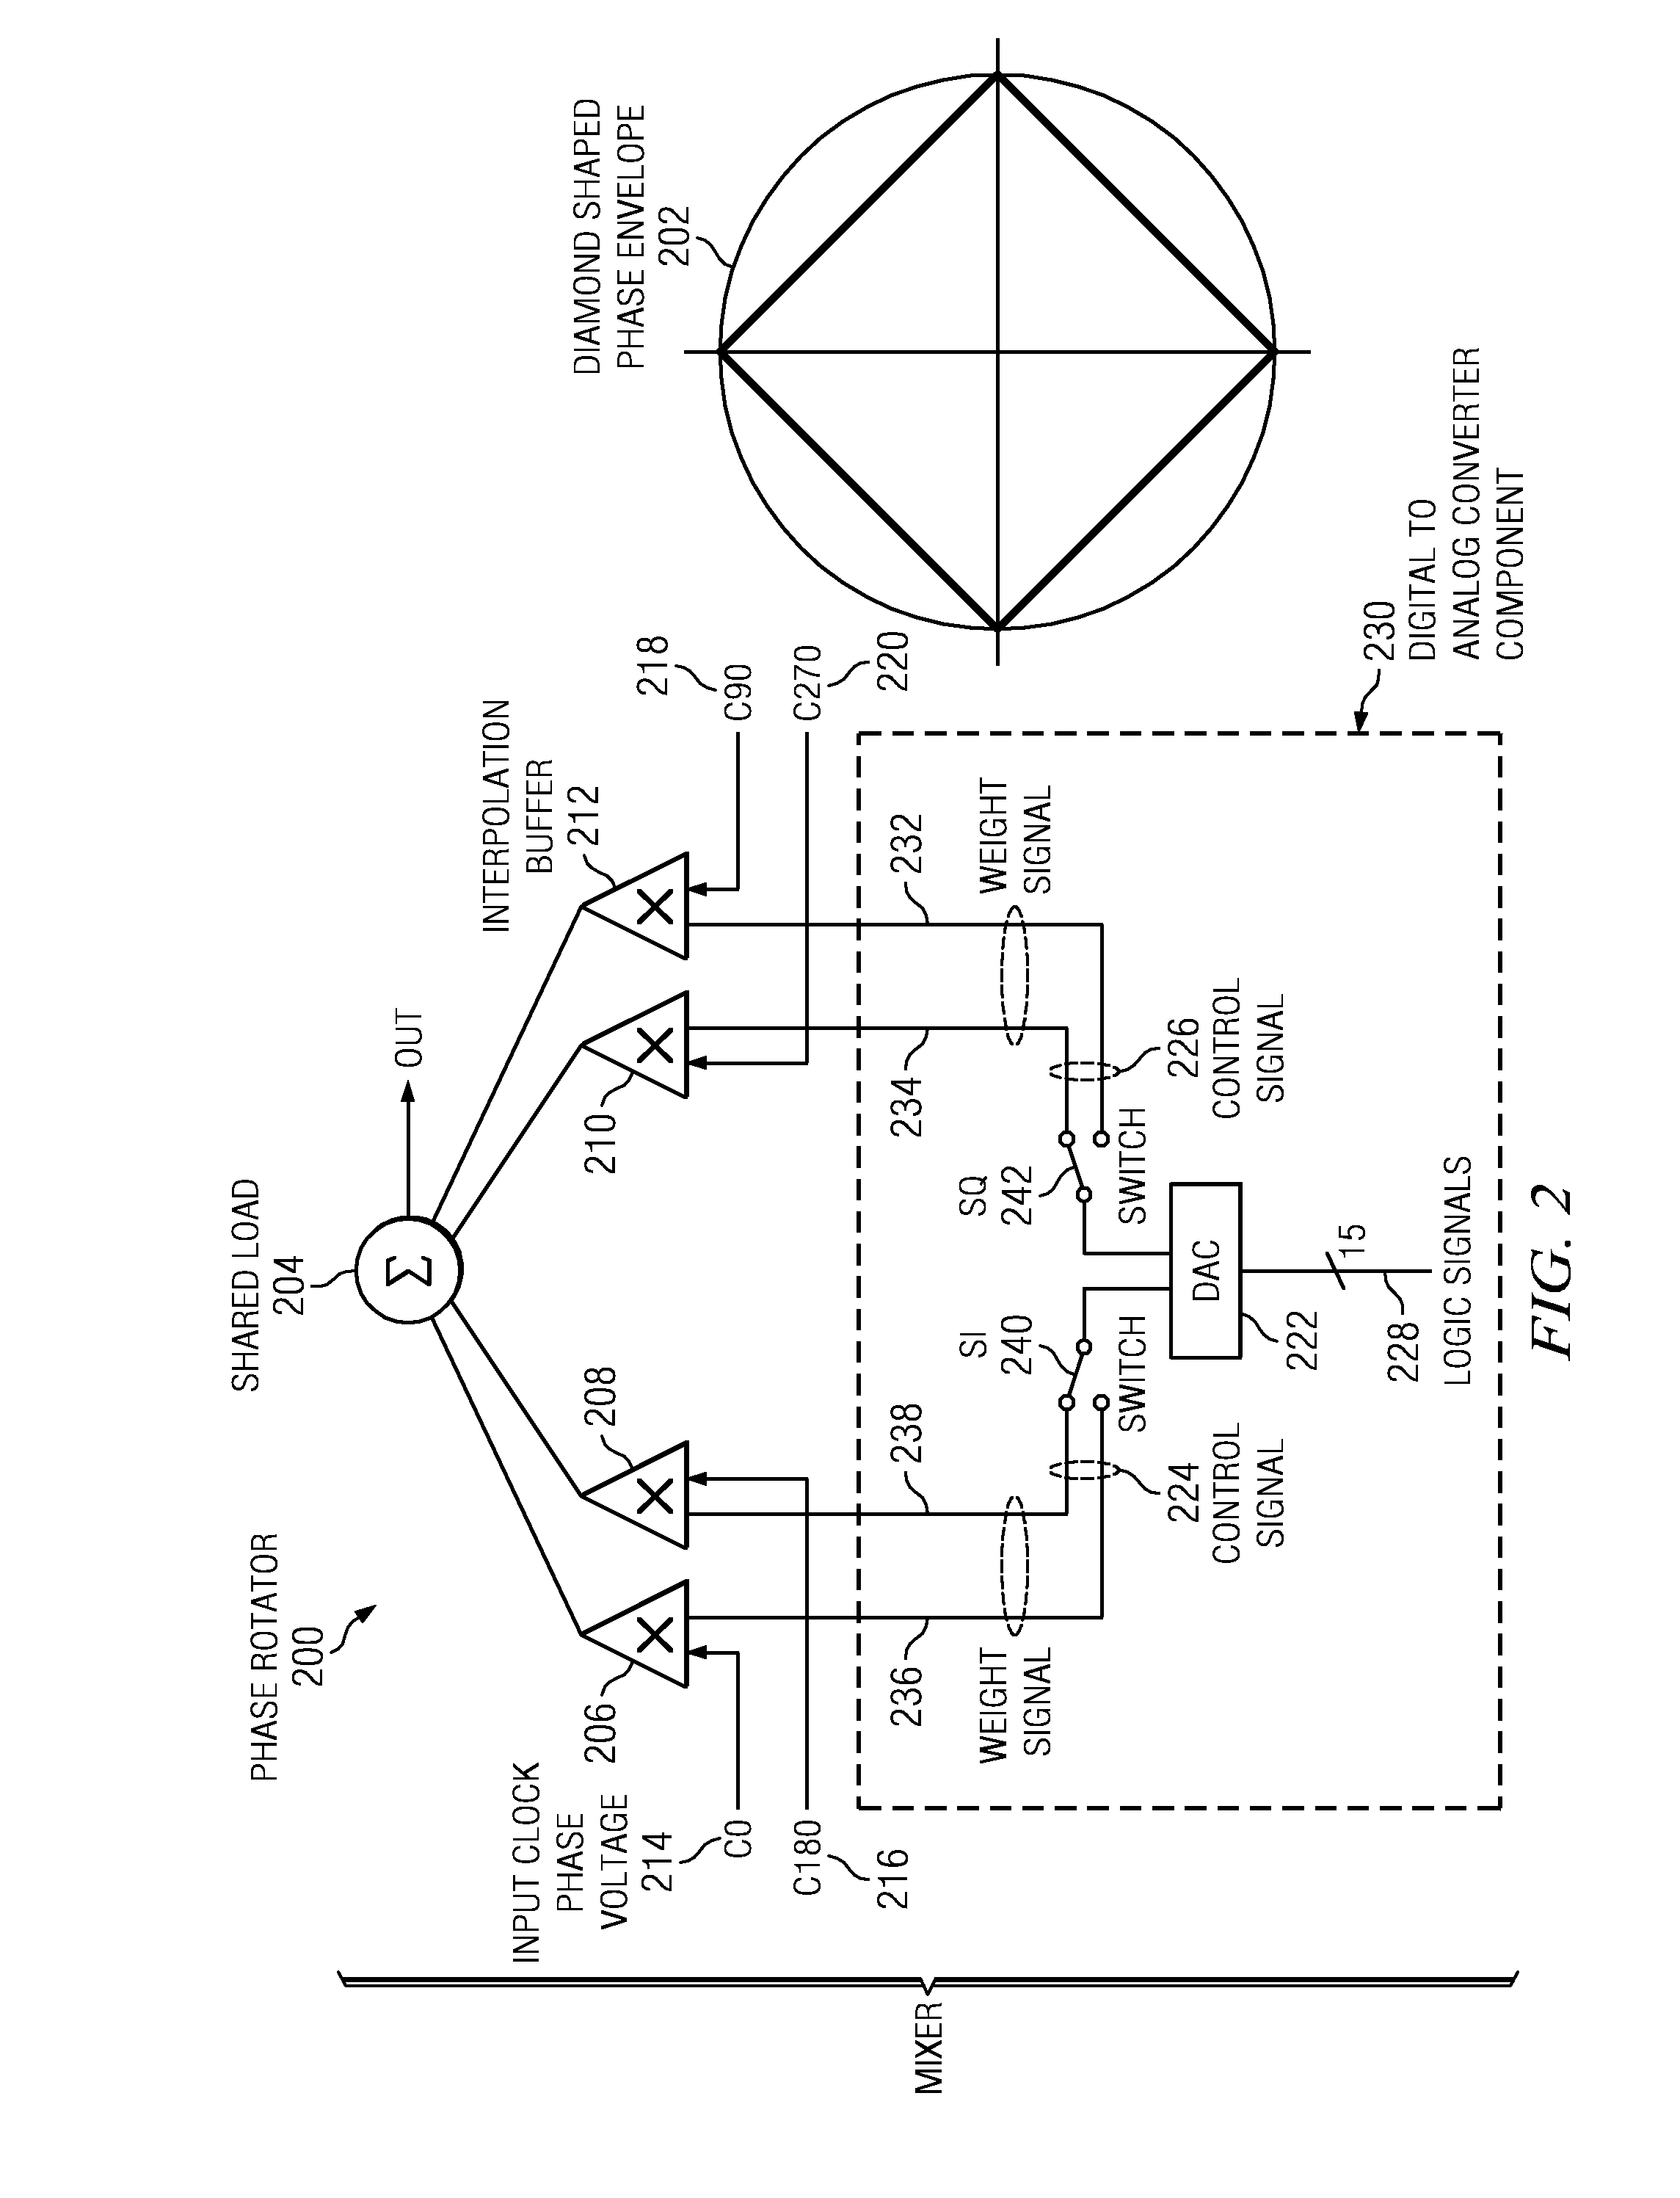 Current-mode phase rotator with partial phase switching